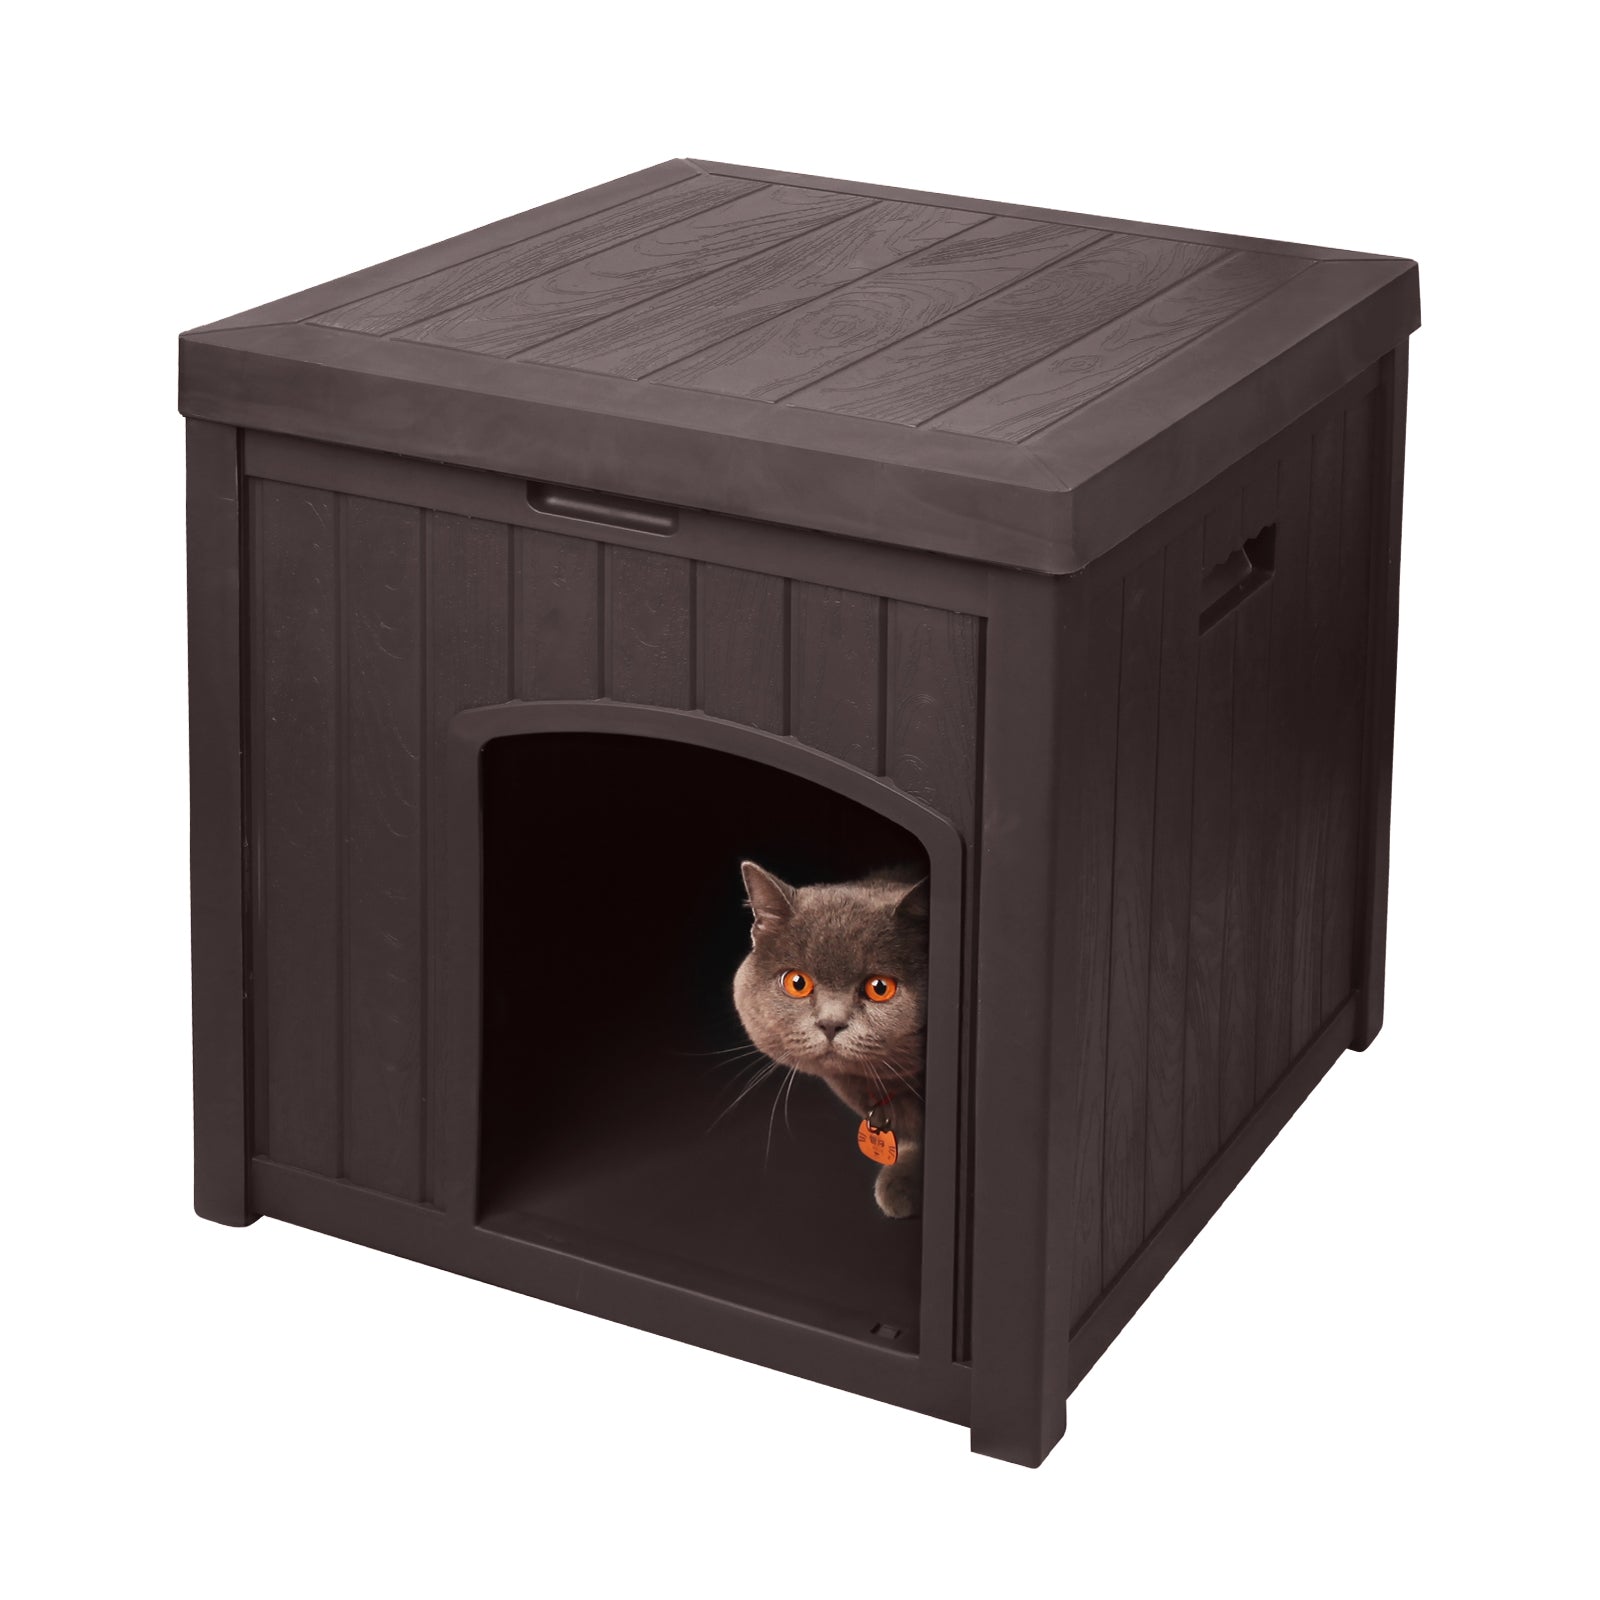 EHHLY Outdoor Cat House for Winter Waterproof, Outside Multiple Feral Cat Houses Weatherproof, Durable Resin Plastic, Brown